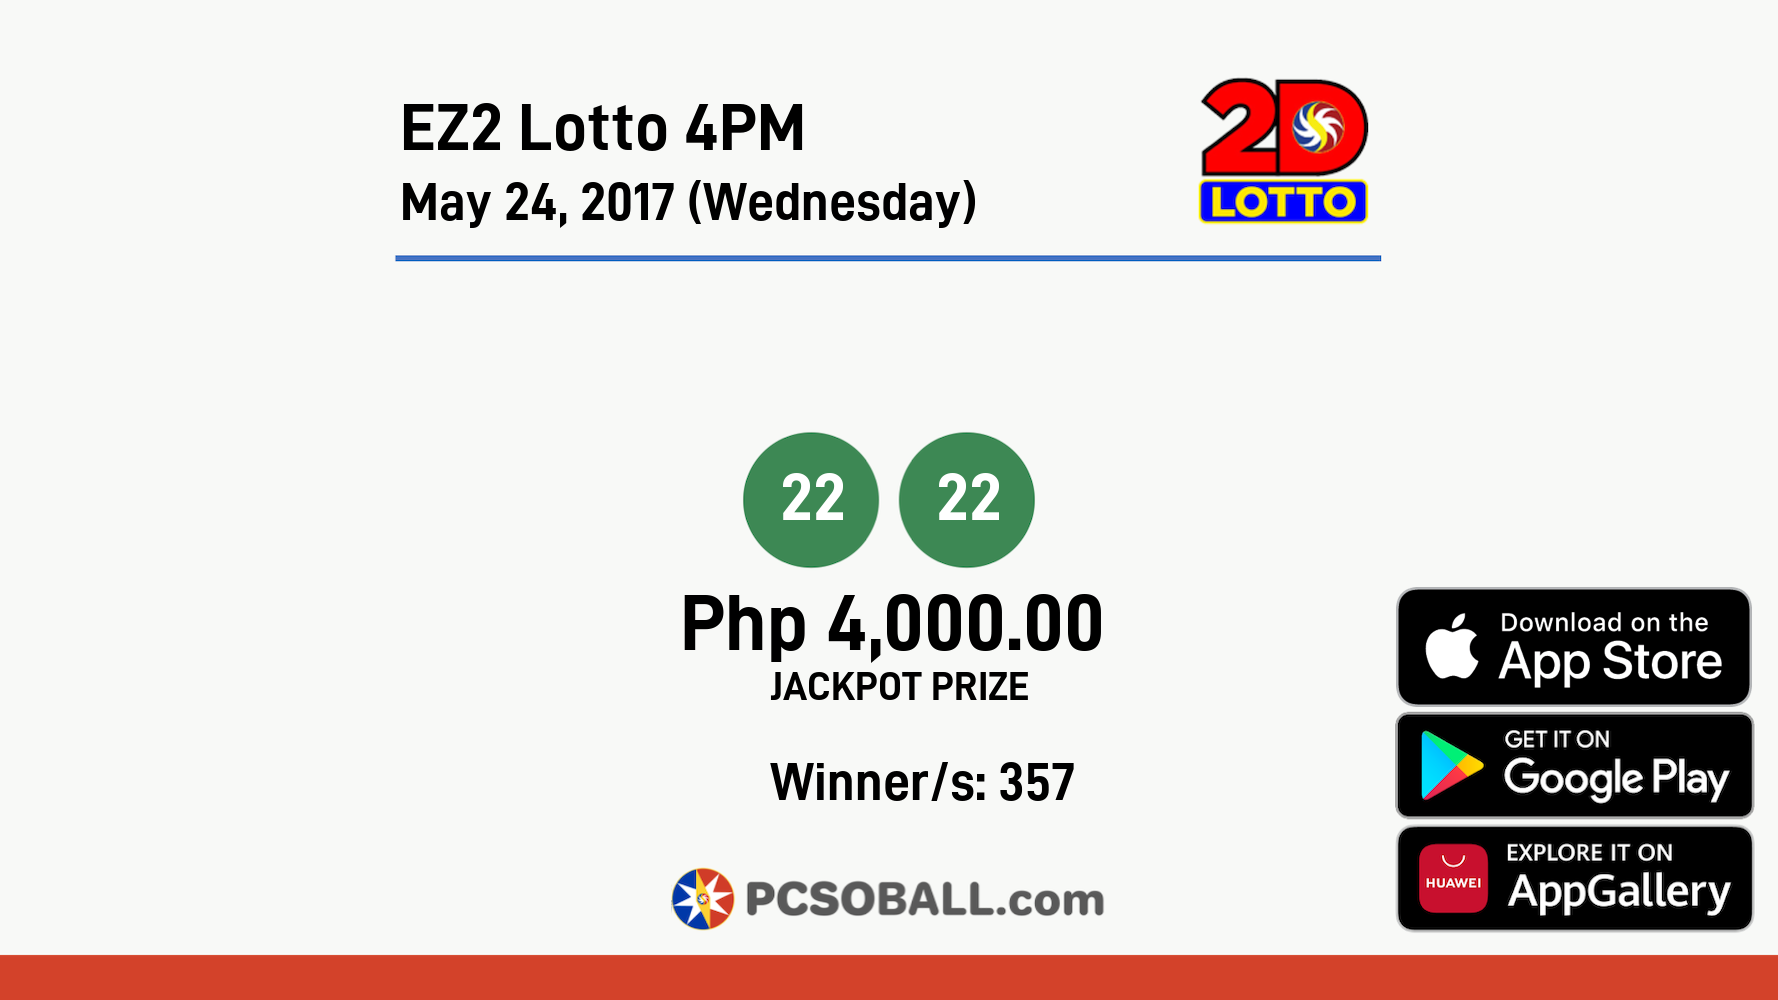 EZ2 Lotto 4PM May 24, 2017 (Wednesday) Result